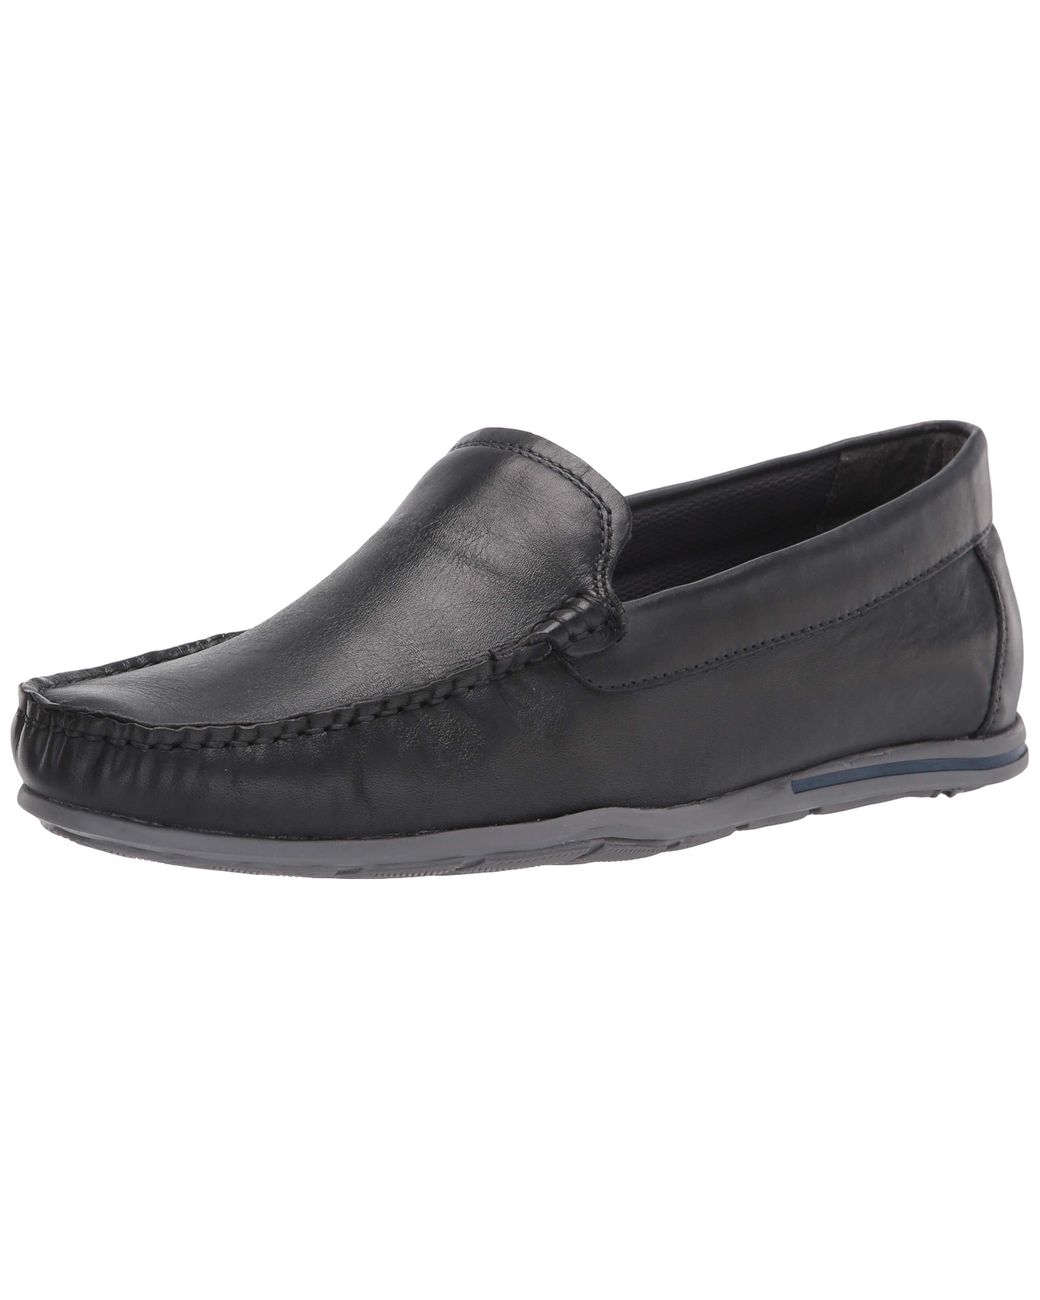 Hush Puppies Leather Parker Venetian Loafer Flat in Navy Leather (Black ...